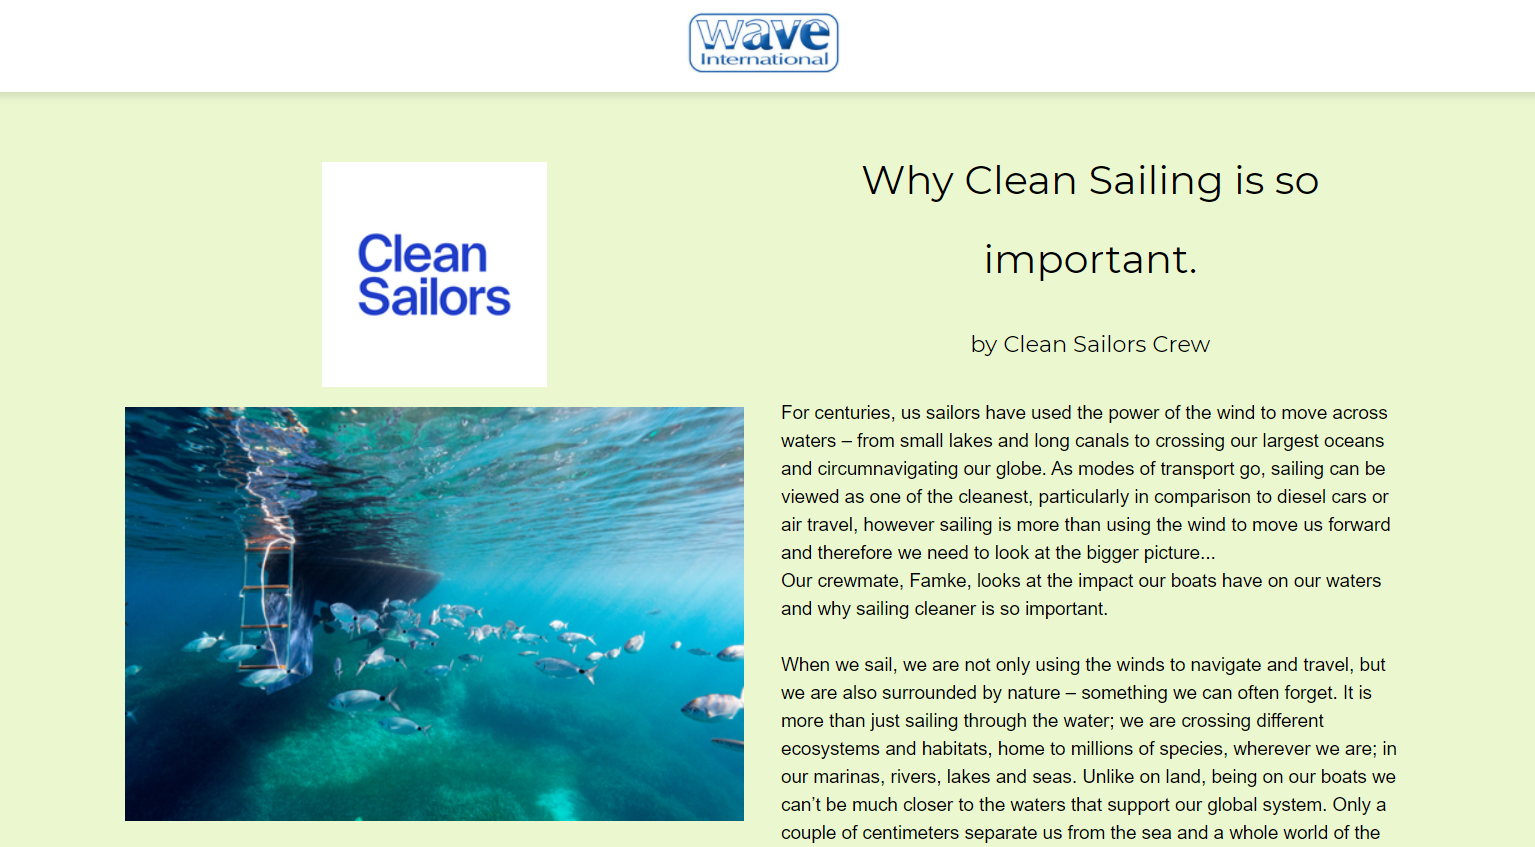 Wave International publishes Clean Sailors' feature on clean sailing